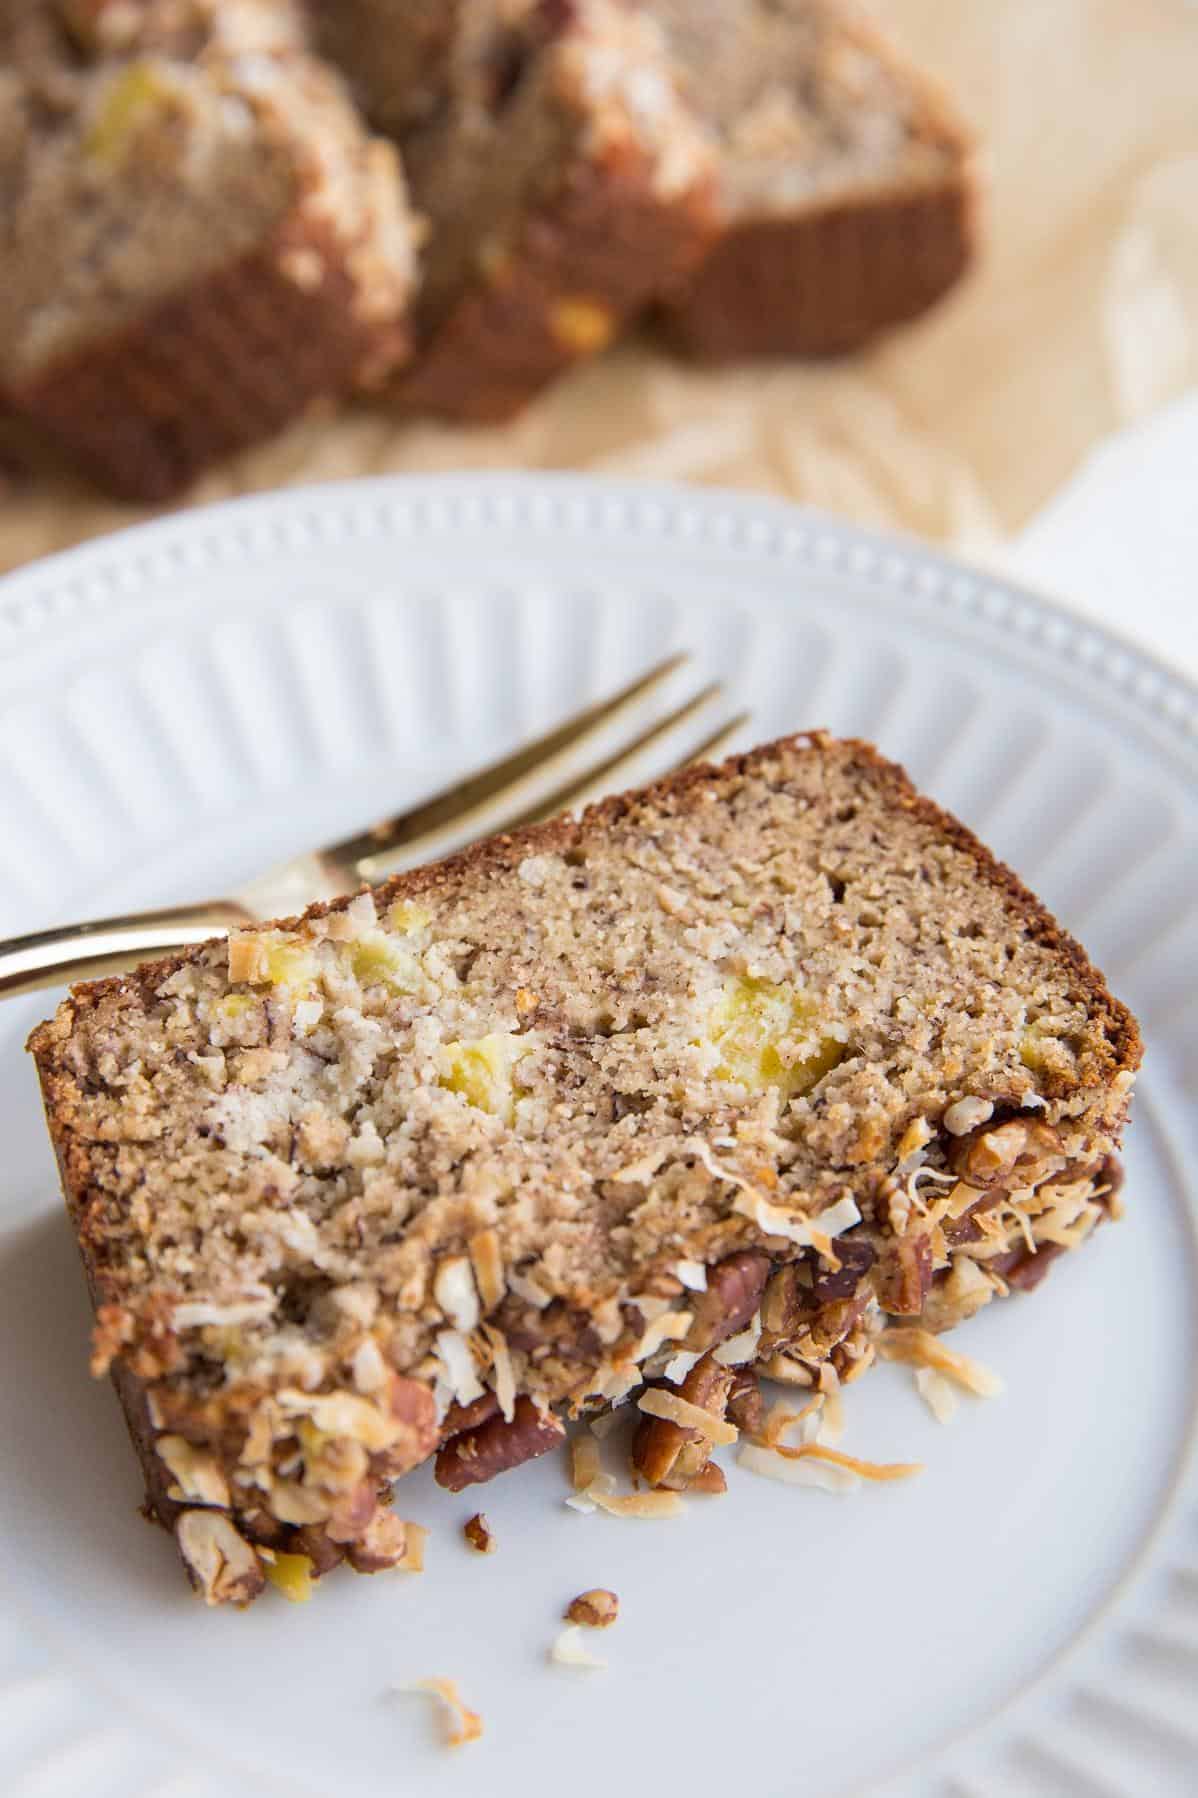  A slice of this gluten-free Hummingbird bread with a cup of coffee is the perfect way to start your morning.